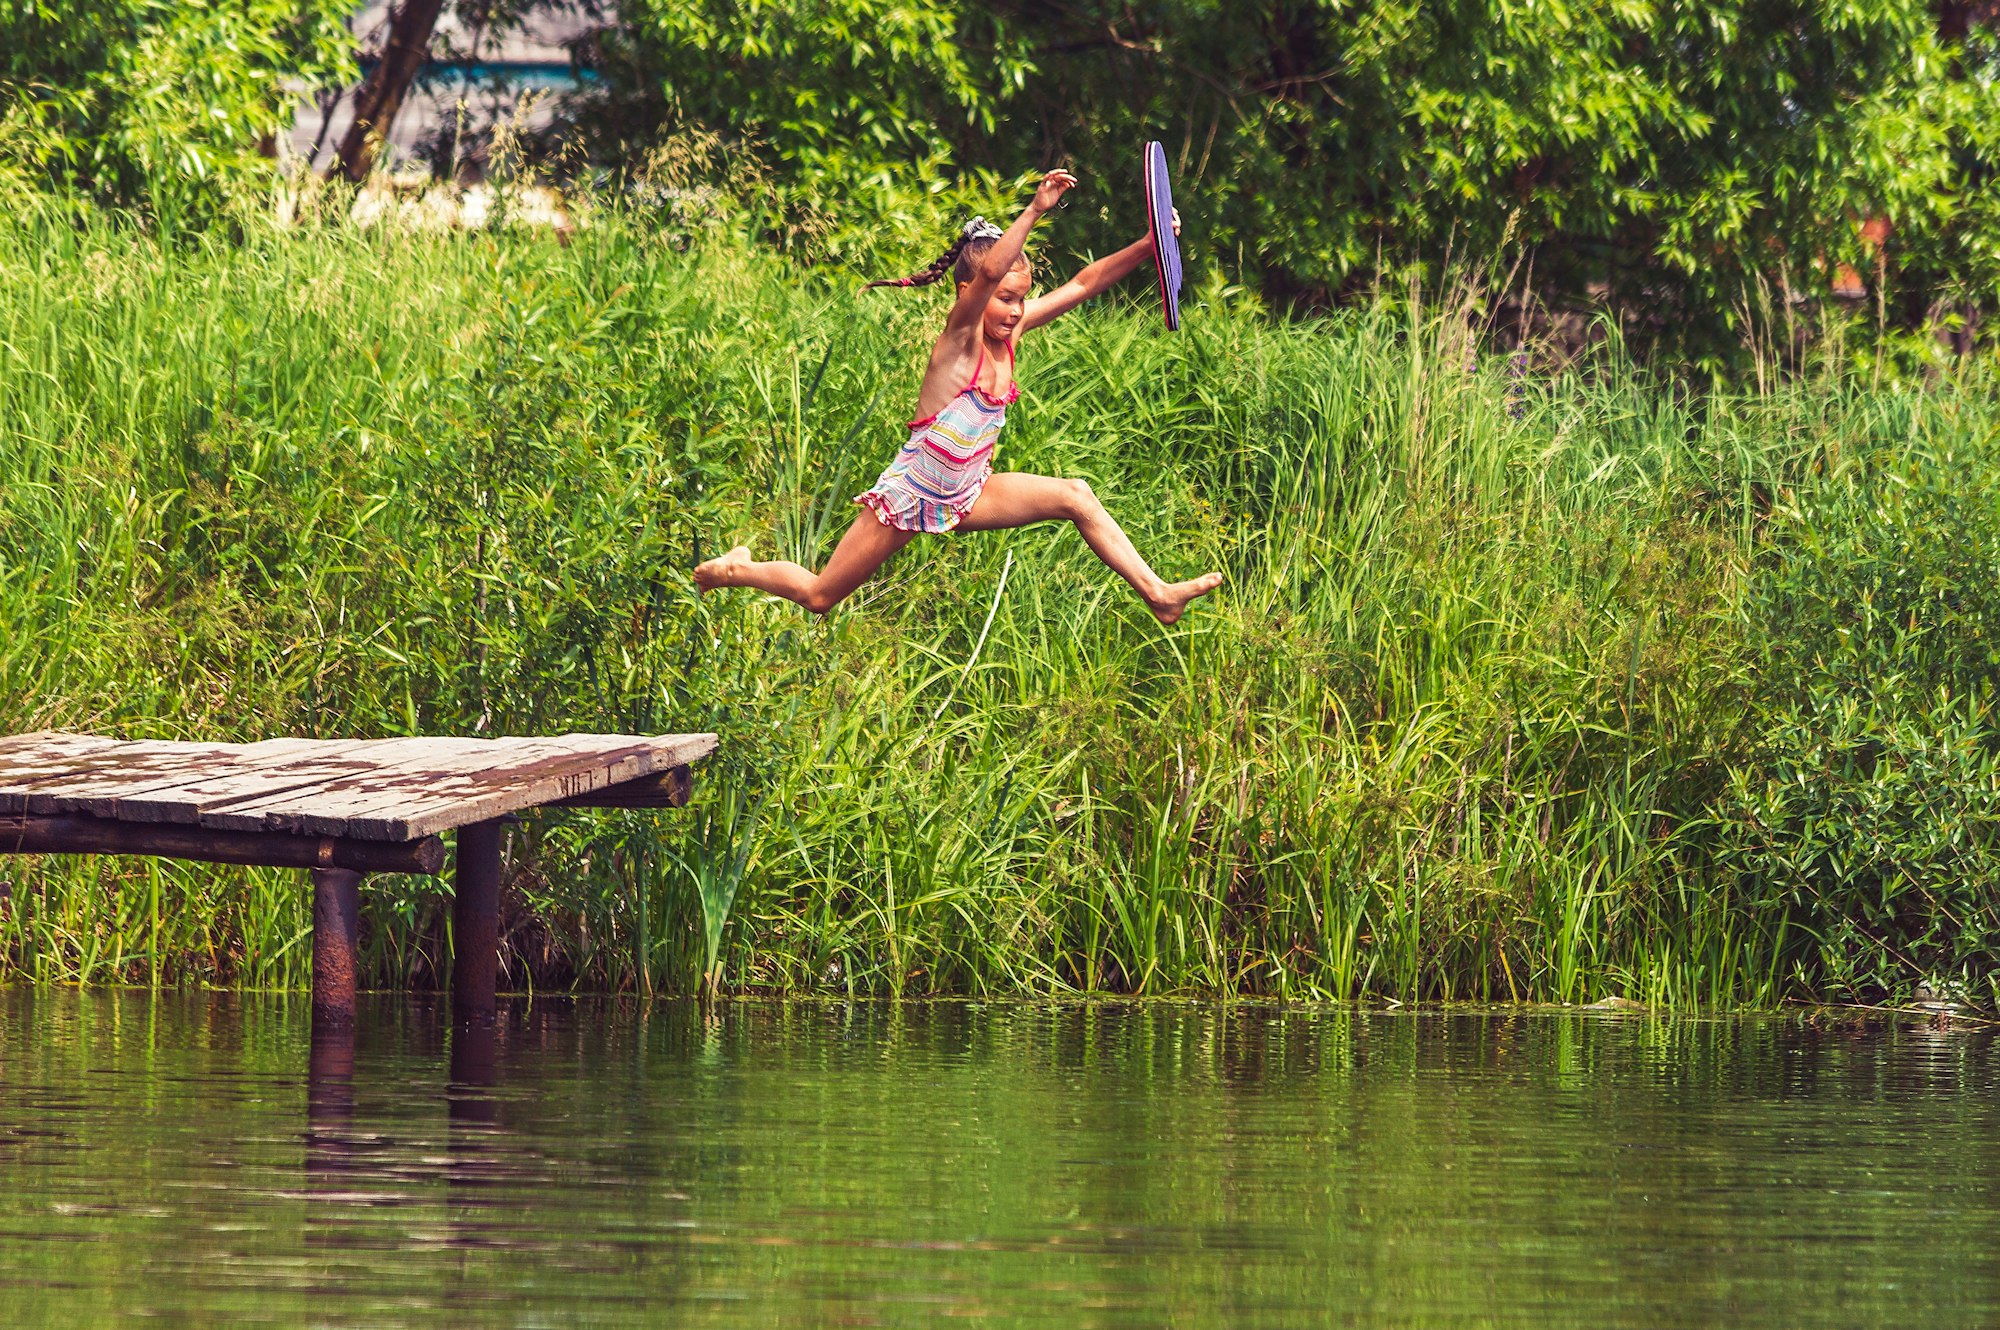 the girl happily jumping into the water